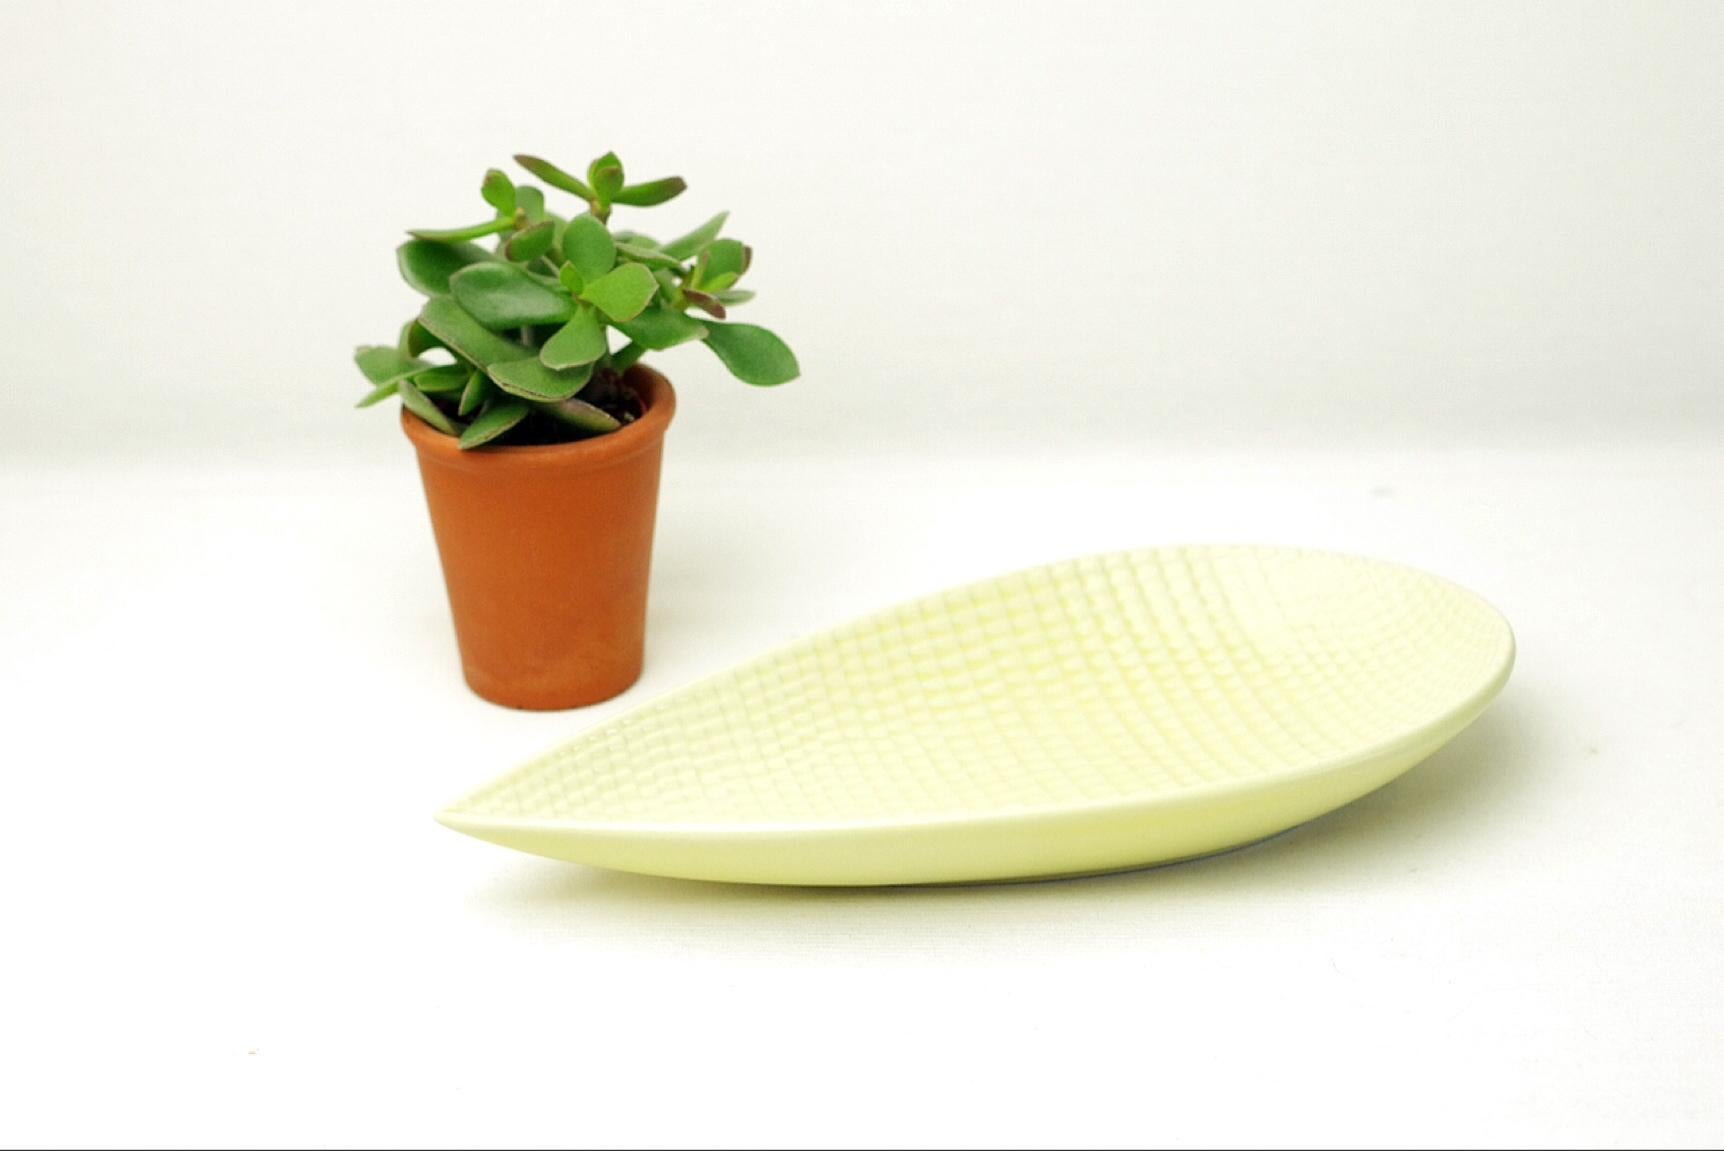 Product Description:
The reptil series of Stig Lindberg gets its name from the reptile-skin-like relief covering all its items. The reptil series consists of vases and plates all in pastel colors like light blue, light green, broken white but also